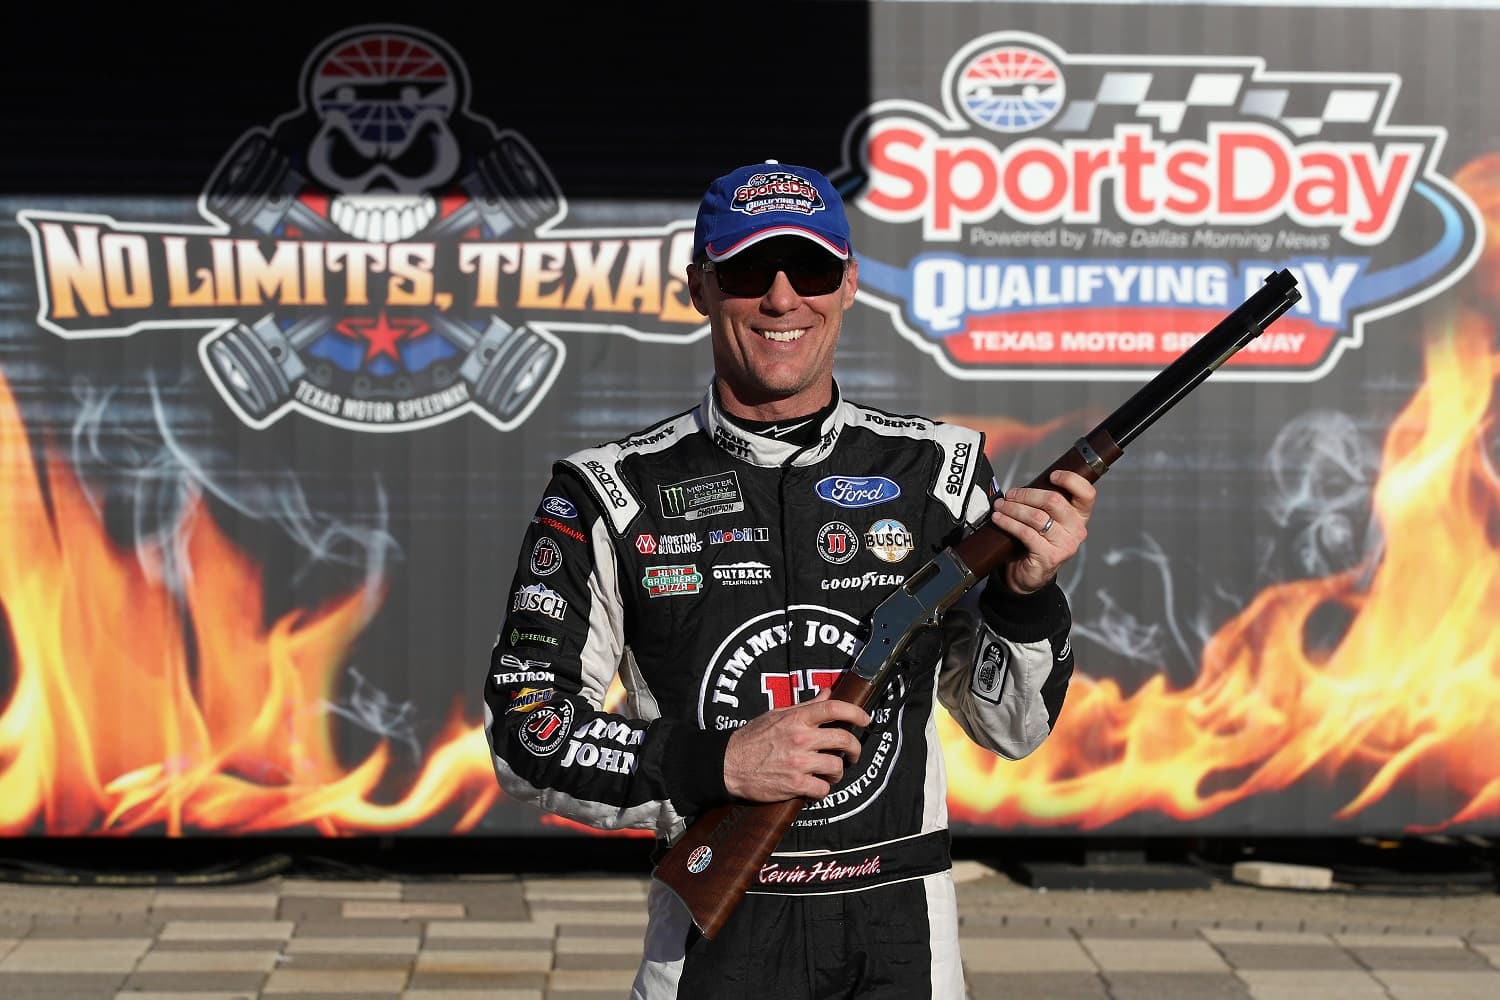 Kevin Harvick poses with the Henry repeating rifle pole award in Victory Lane after qualifying for pole position for the Monster Energy NASCAR Cup Series O'Reilly Auto Parts 500 at Texas Motor Speedway on April 7, 2017. } Chris Graythen/Getty Images